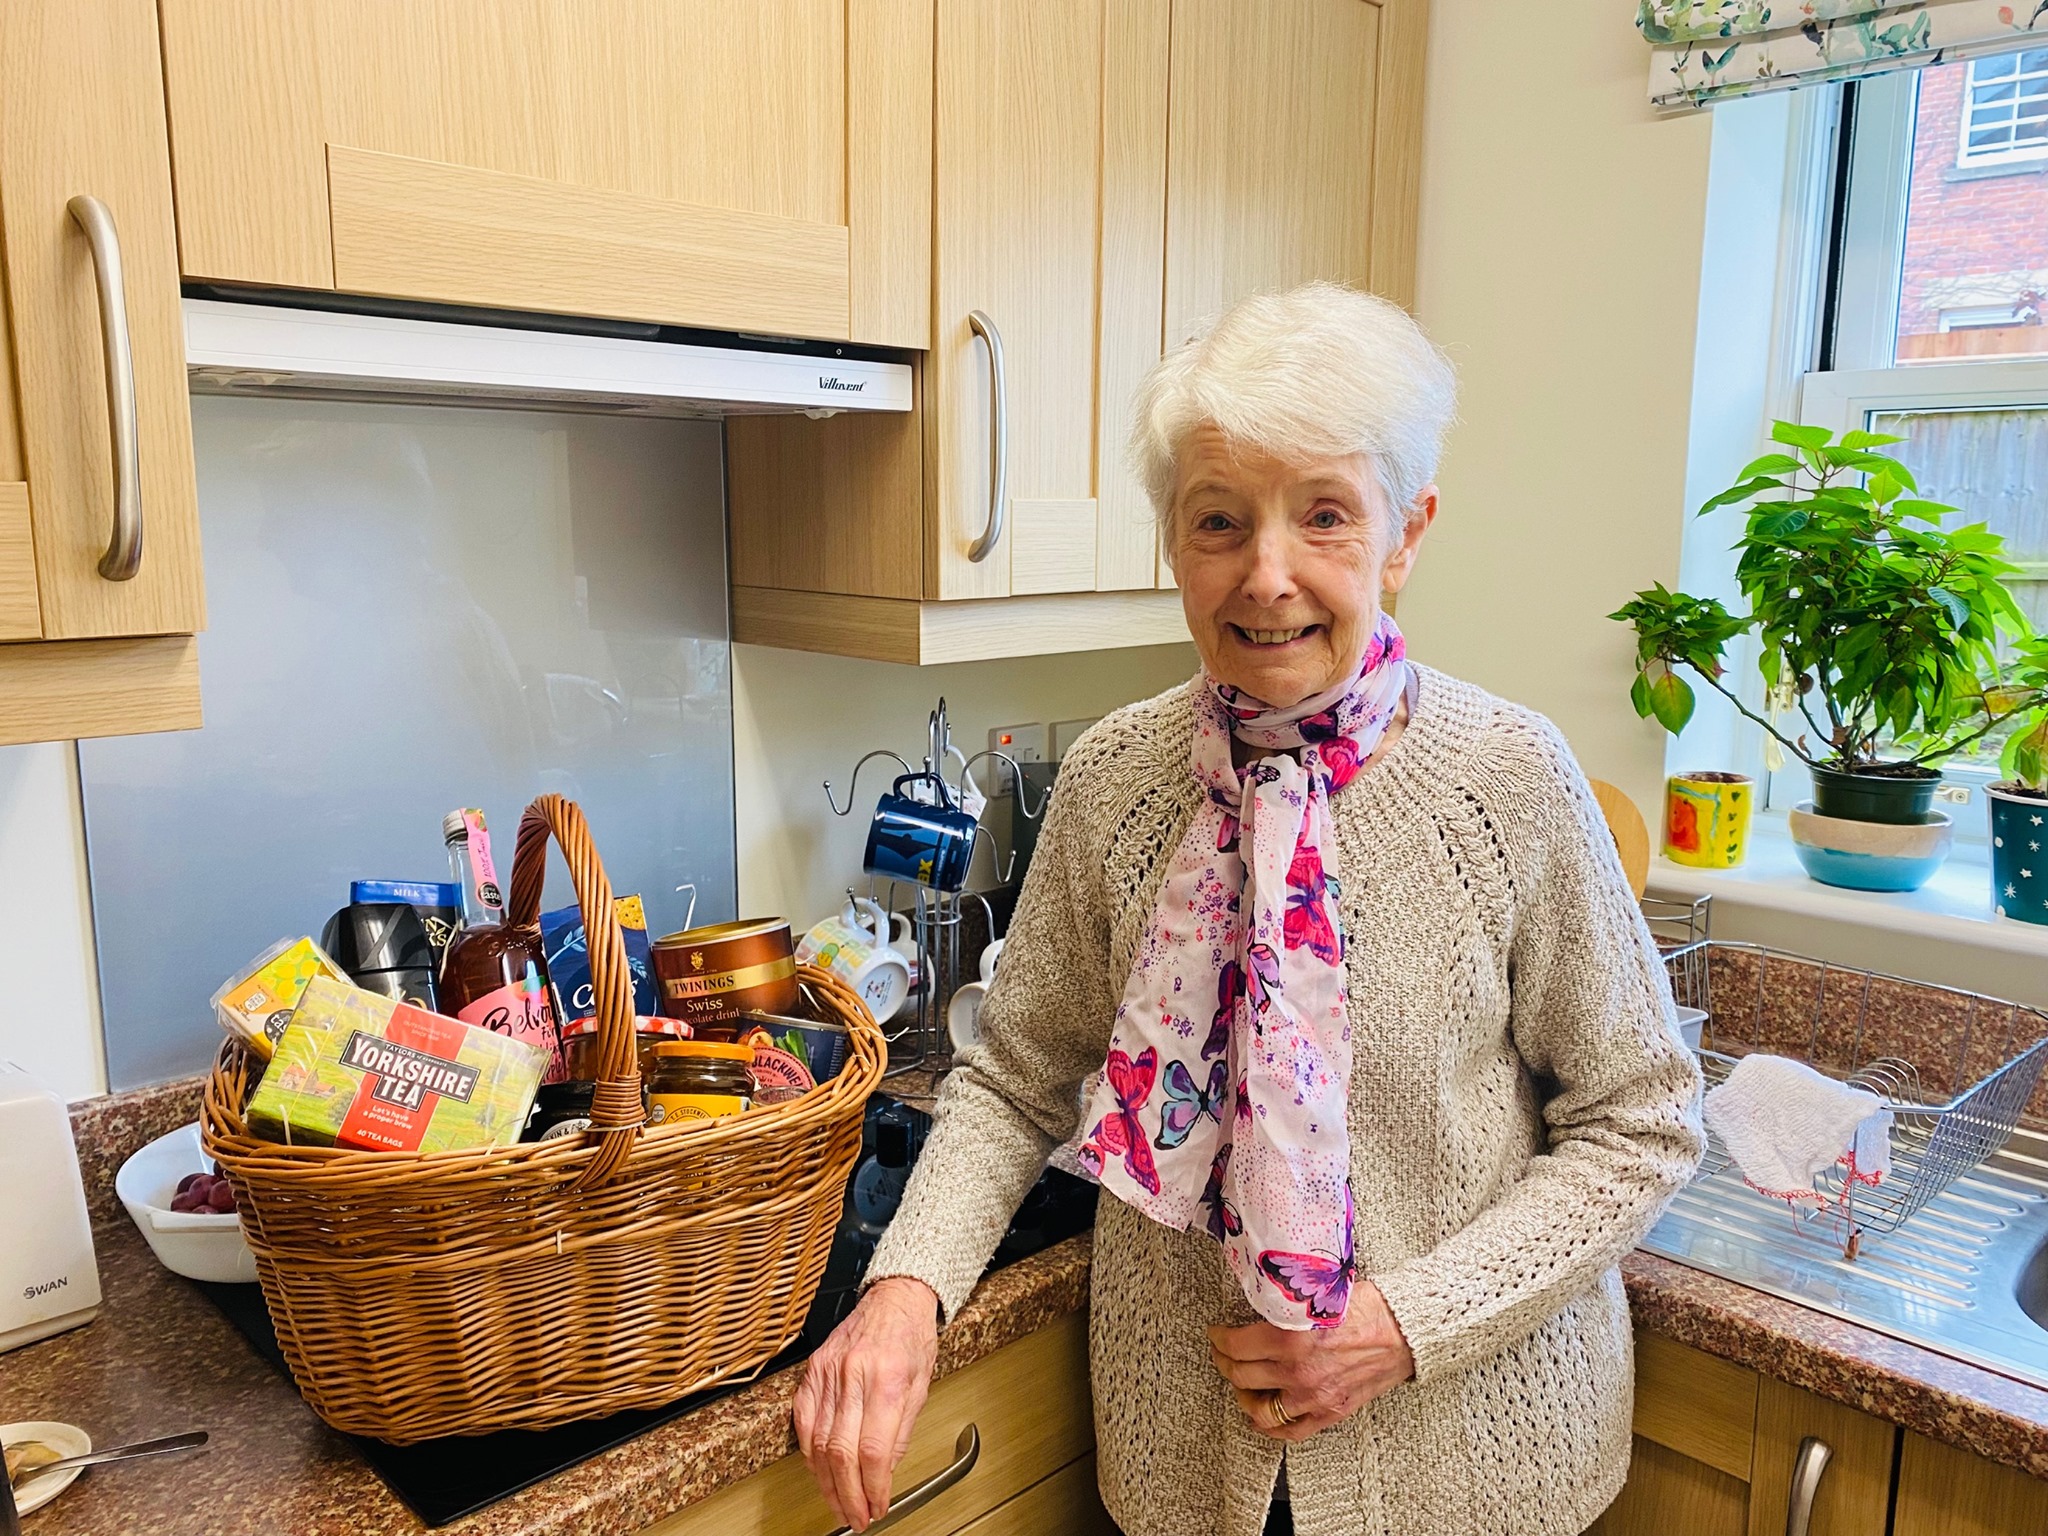 Our new owners at Linford Court, in North Walsham, were over the moon with their welcome hampers 😁